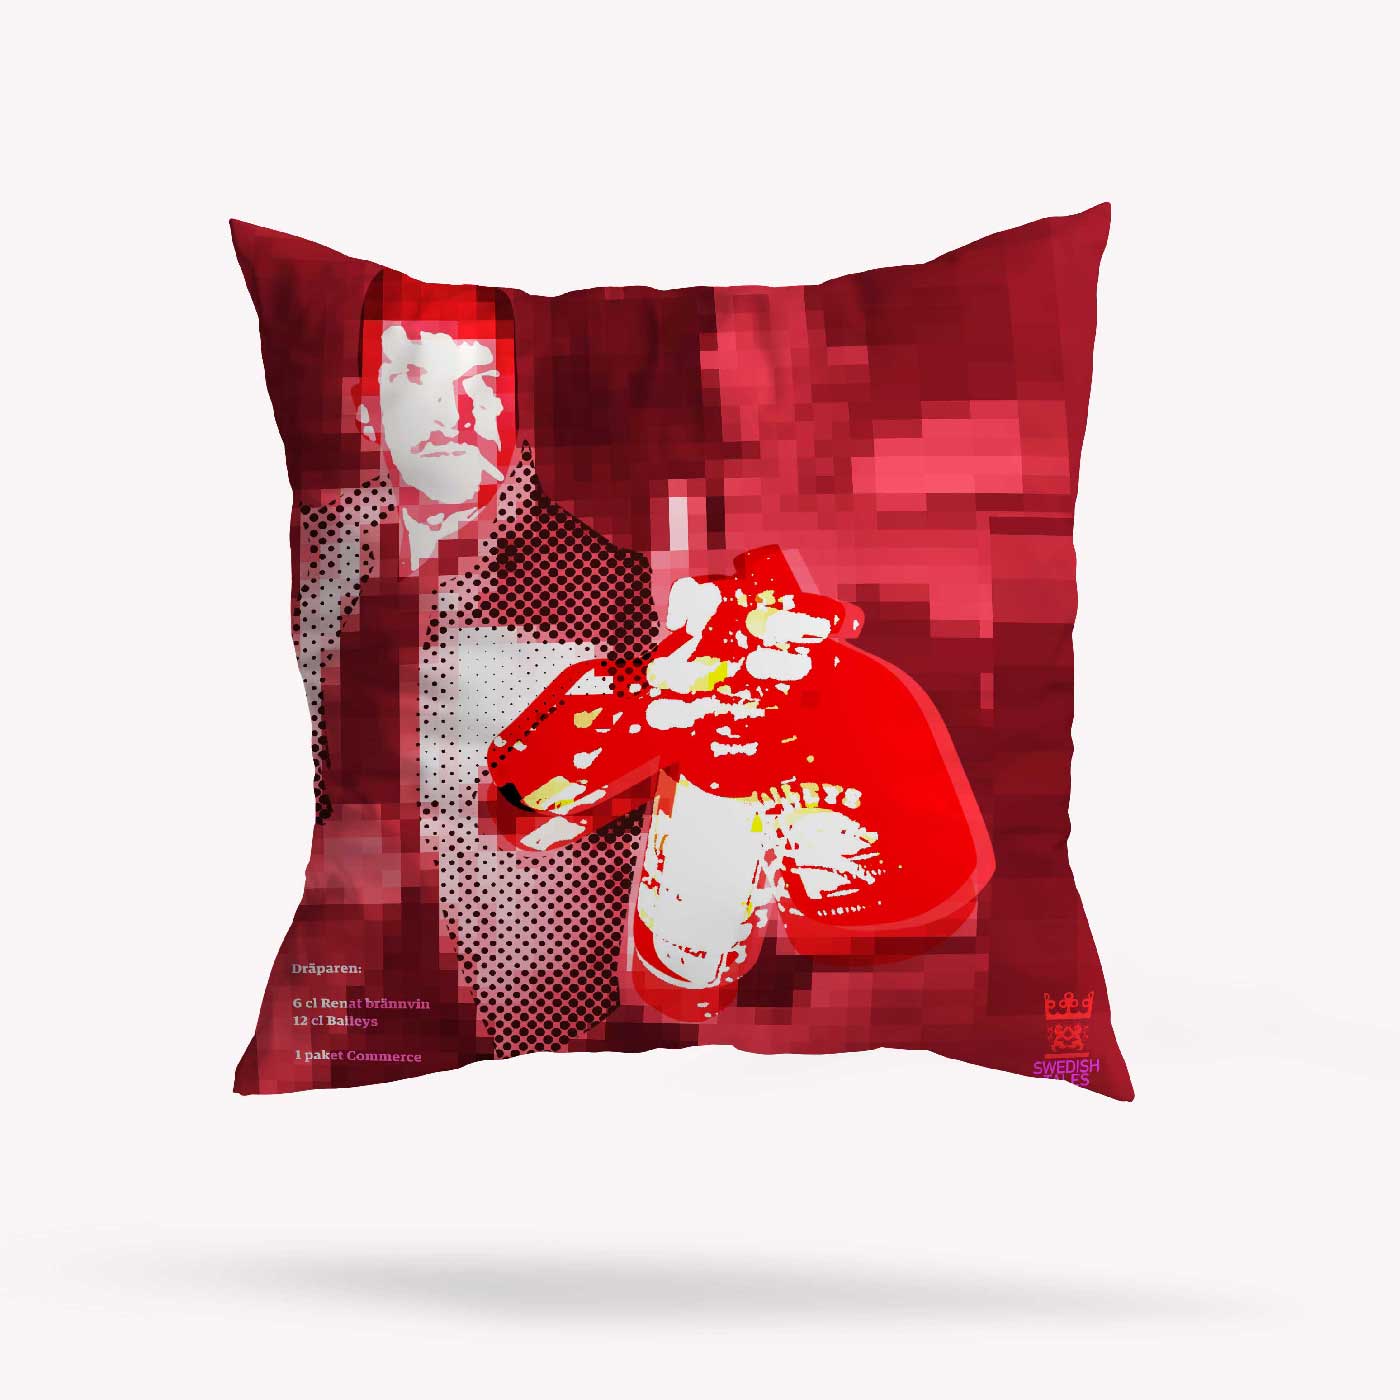 Christer-Pettersson-killer-of-Olof-Palme-,-pillow-case-red